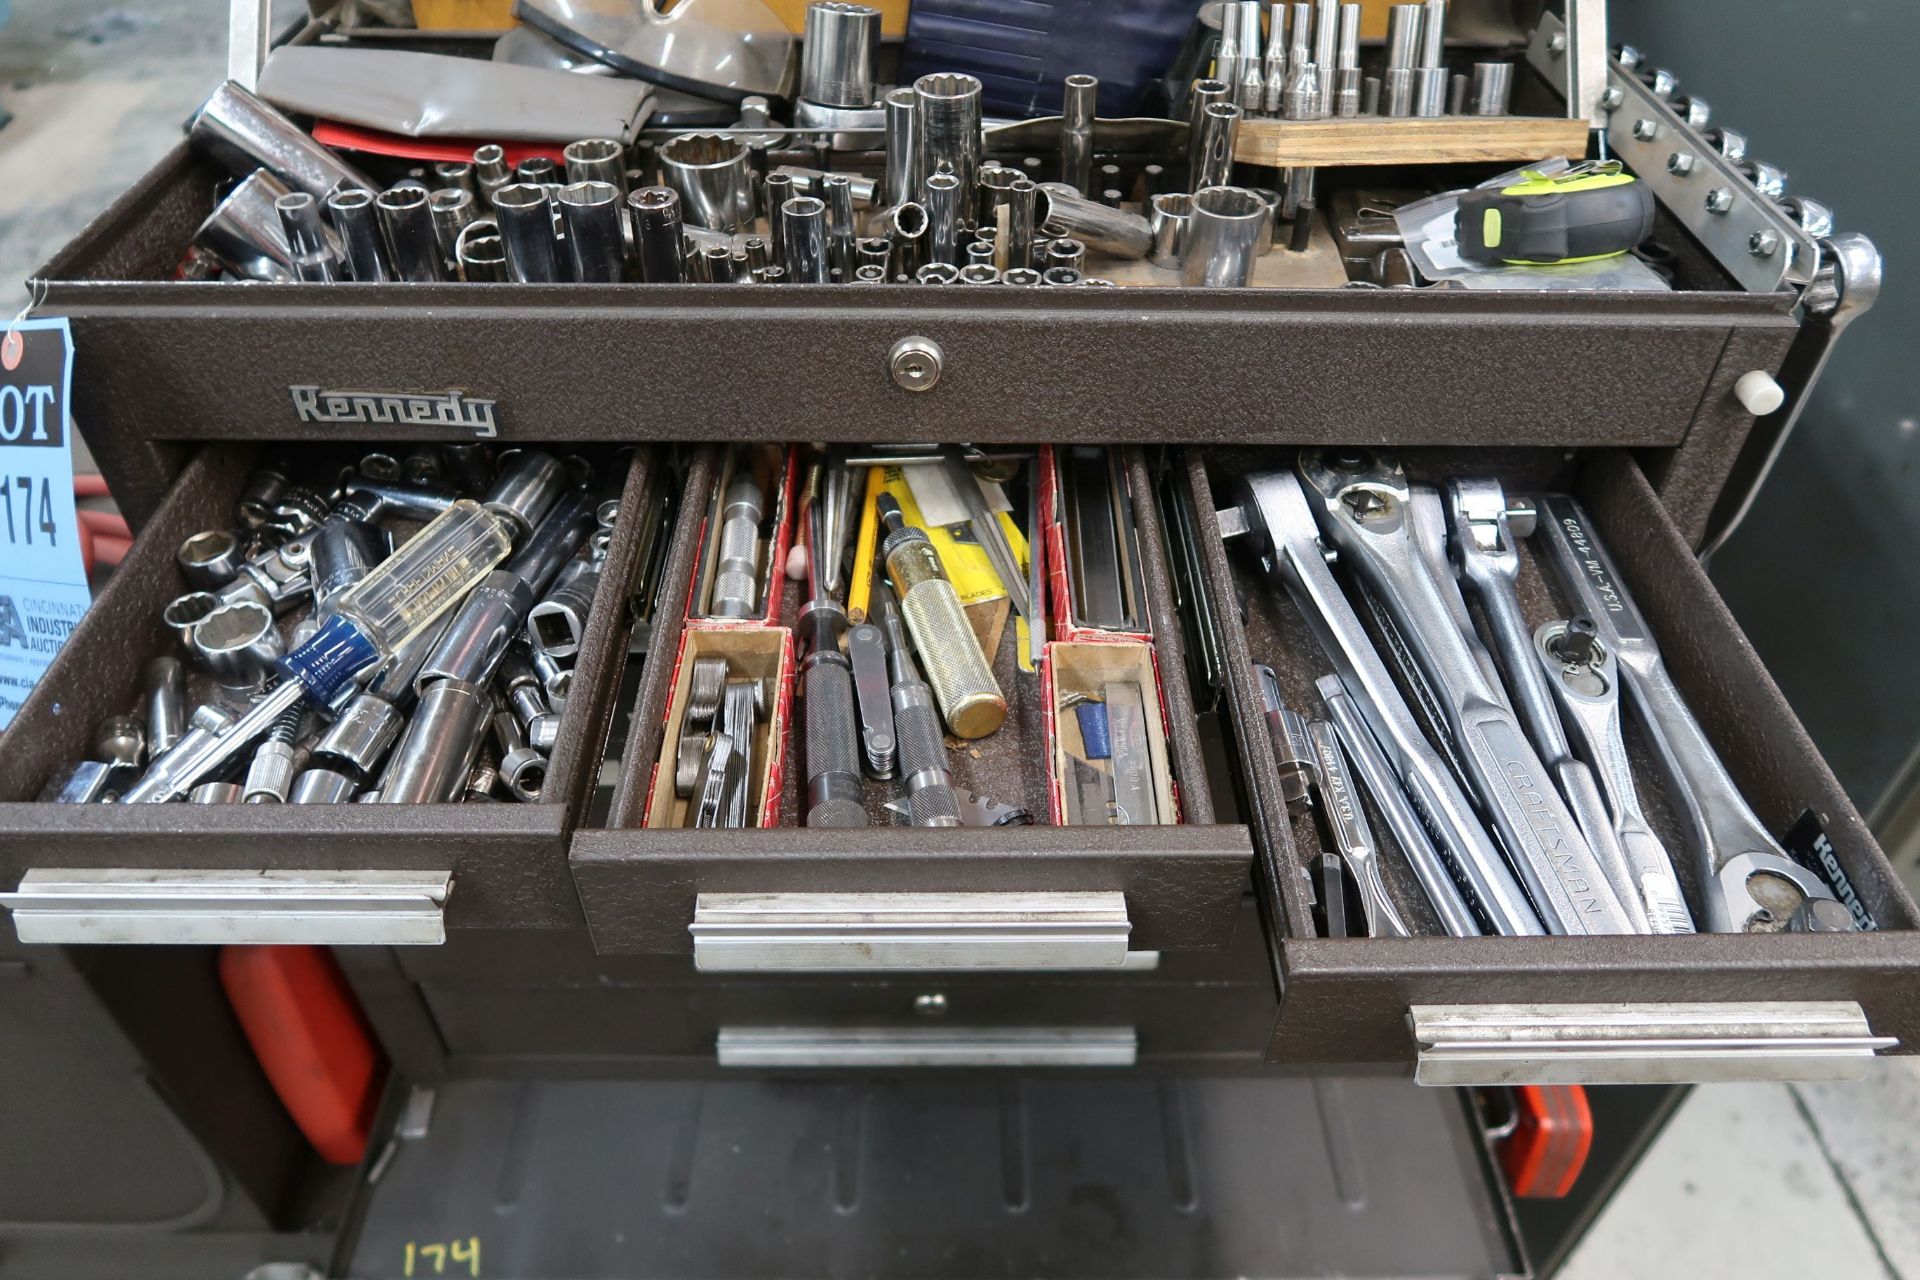 15-DRAWER KENNEDY PORTABLE TOOLBOX WITH TOOLS - Image 4 of 15